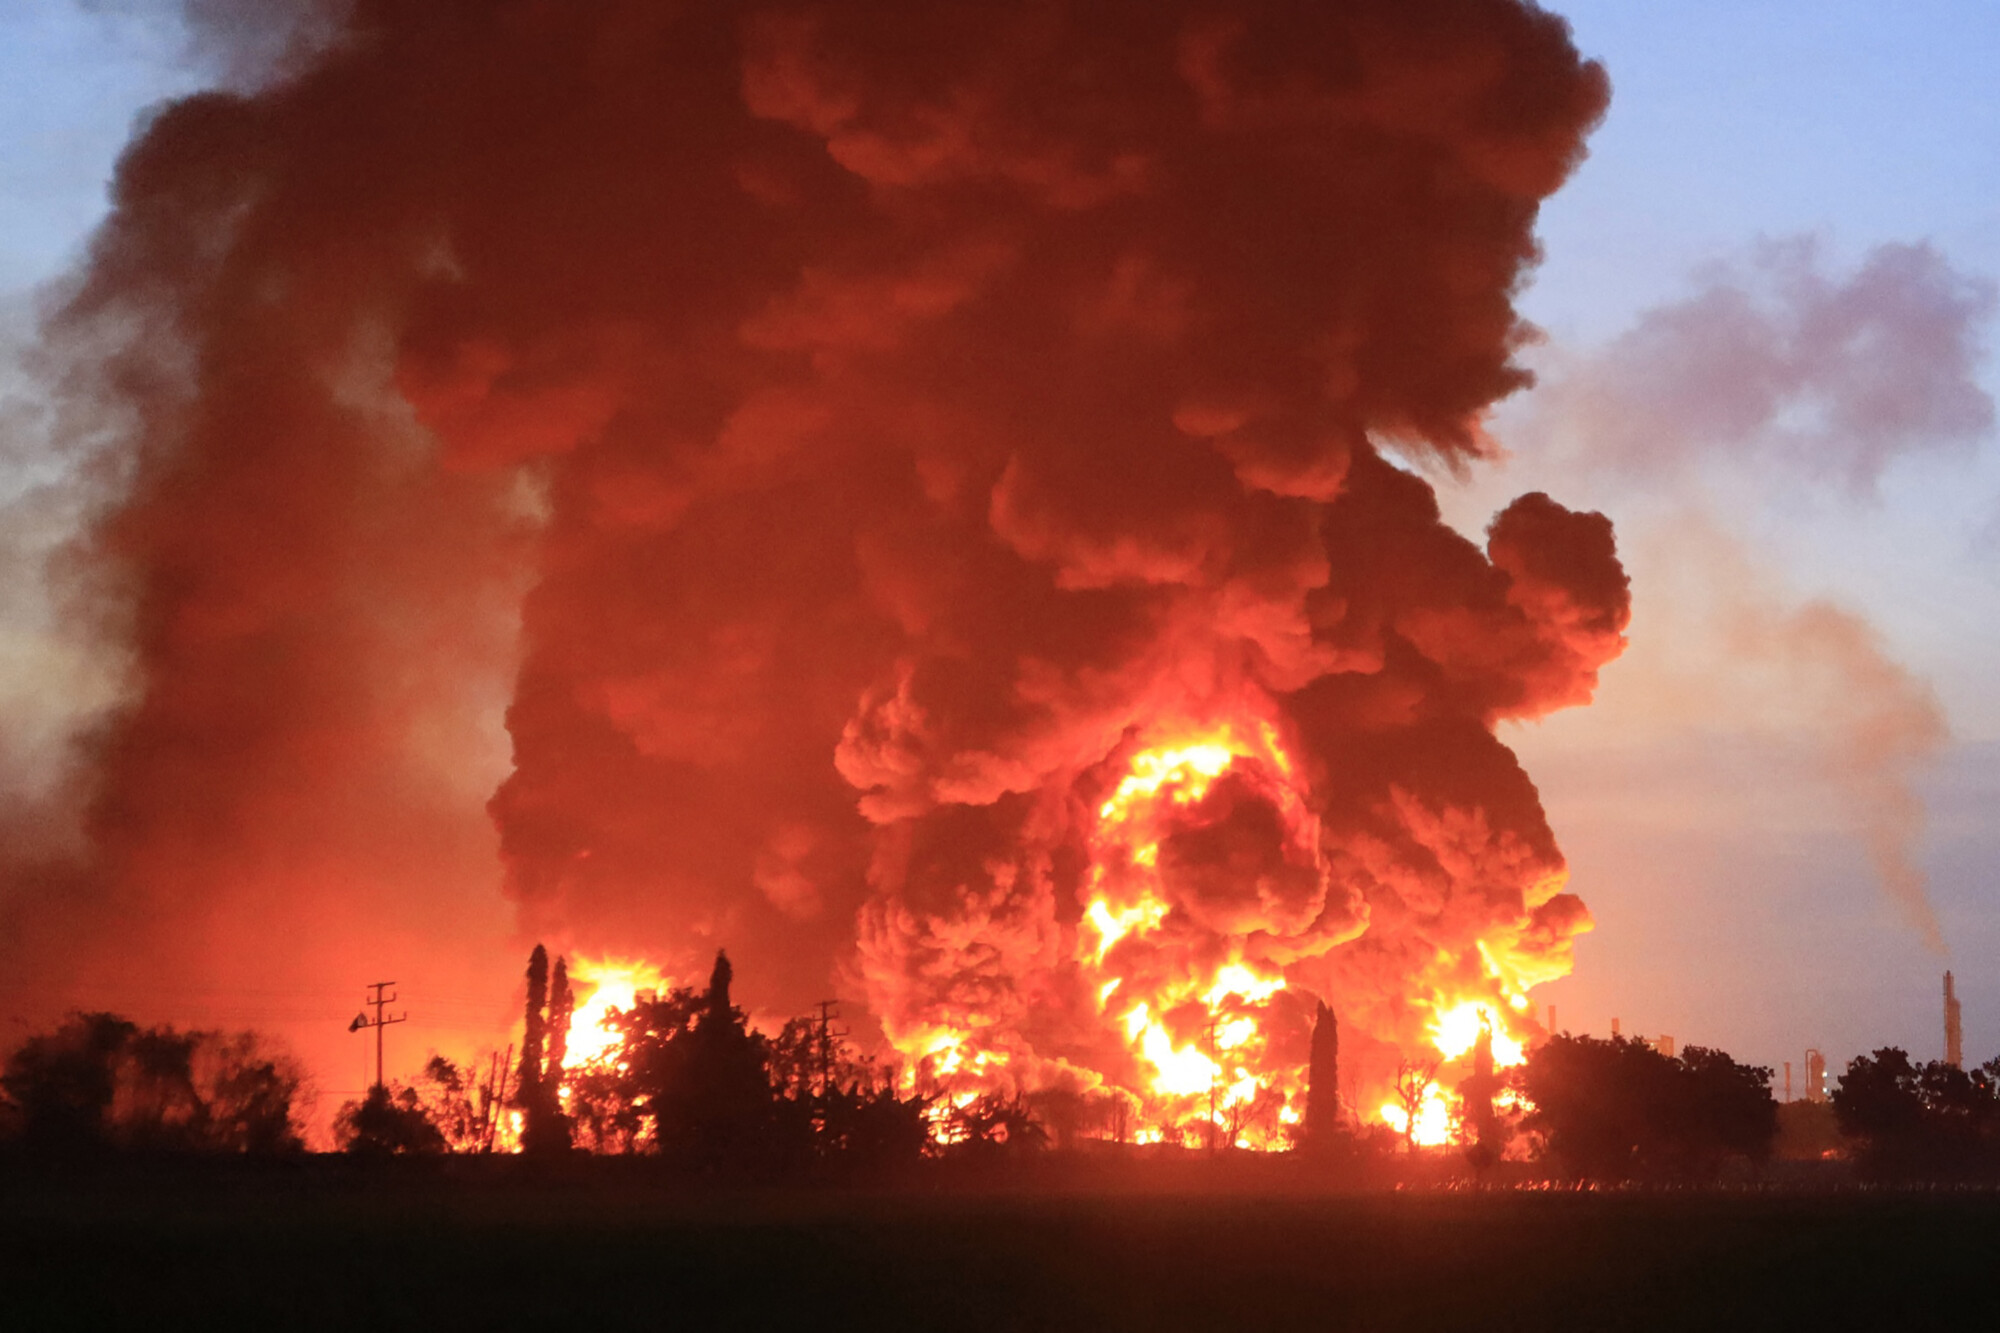 Indonesia: Huge Fire Breaks out at Oil Refinery